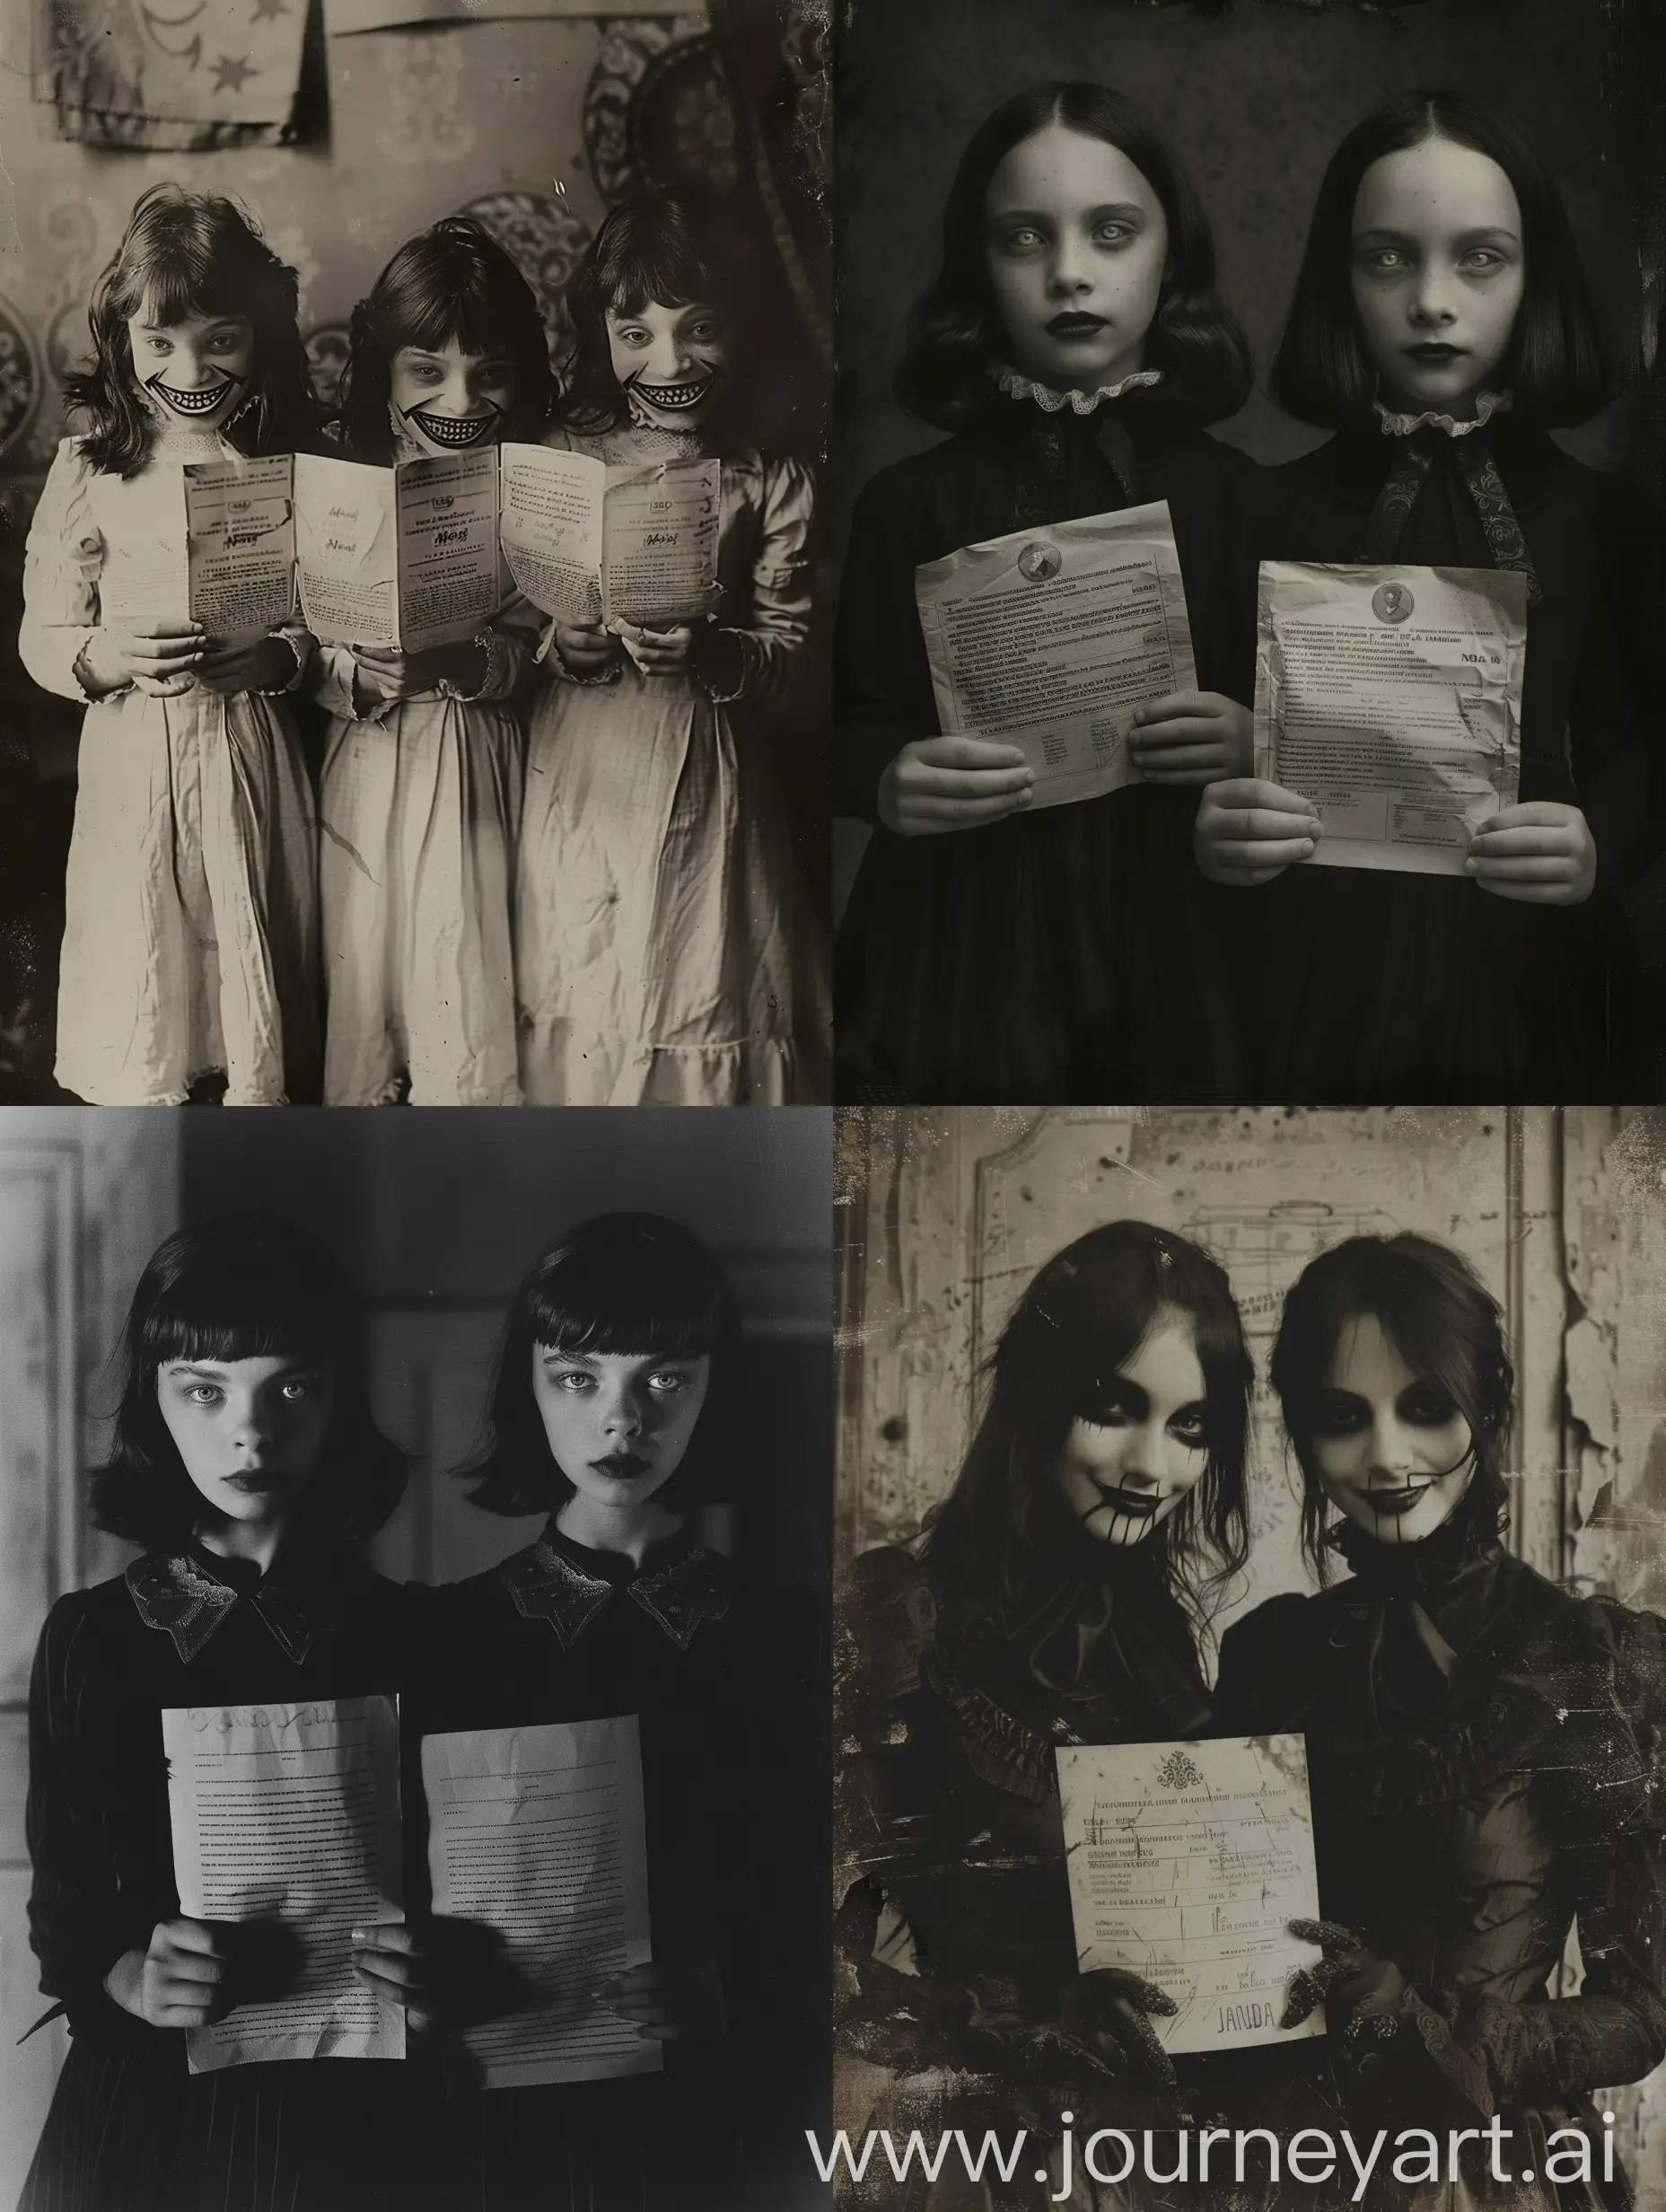 Emil Melmoth photo, modern scammer girls holding paper with text "JANDA", sinister smiles, dishonest grins 